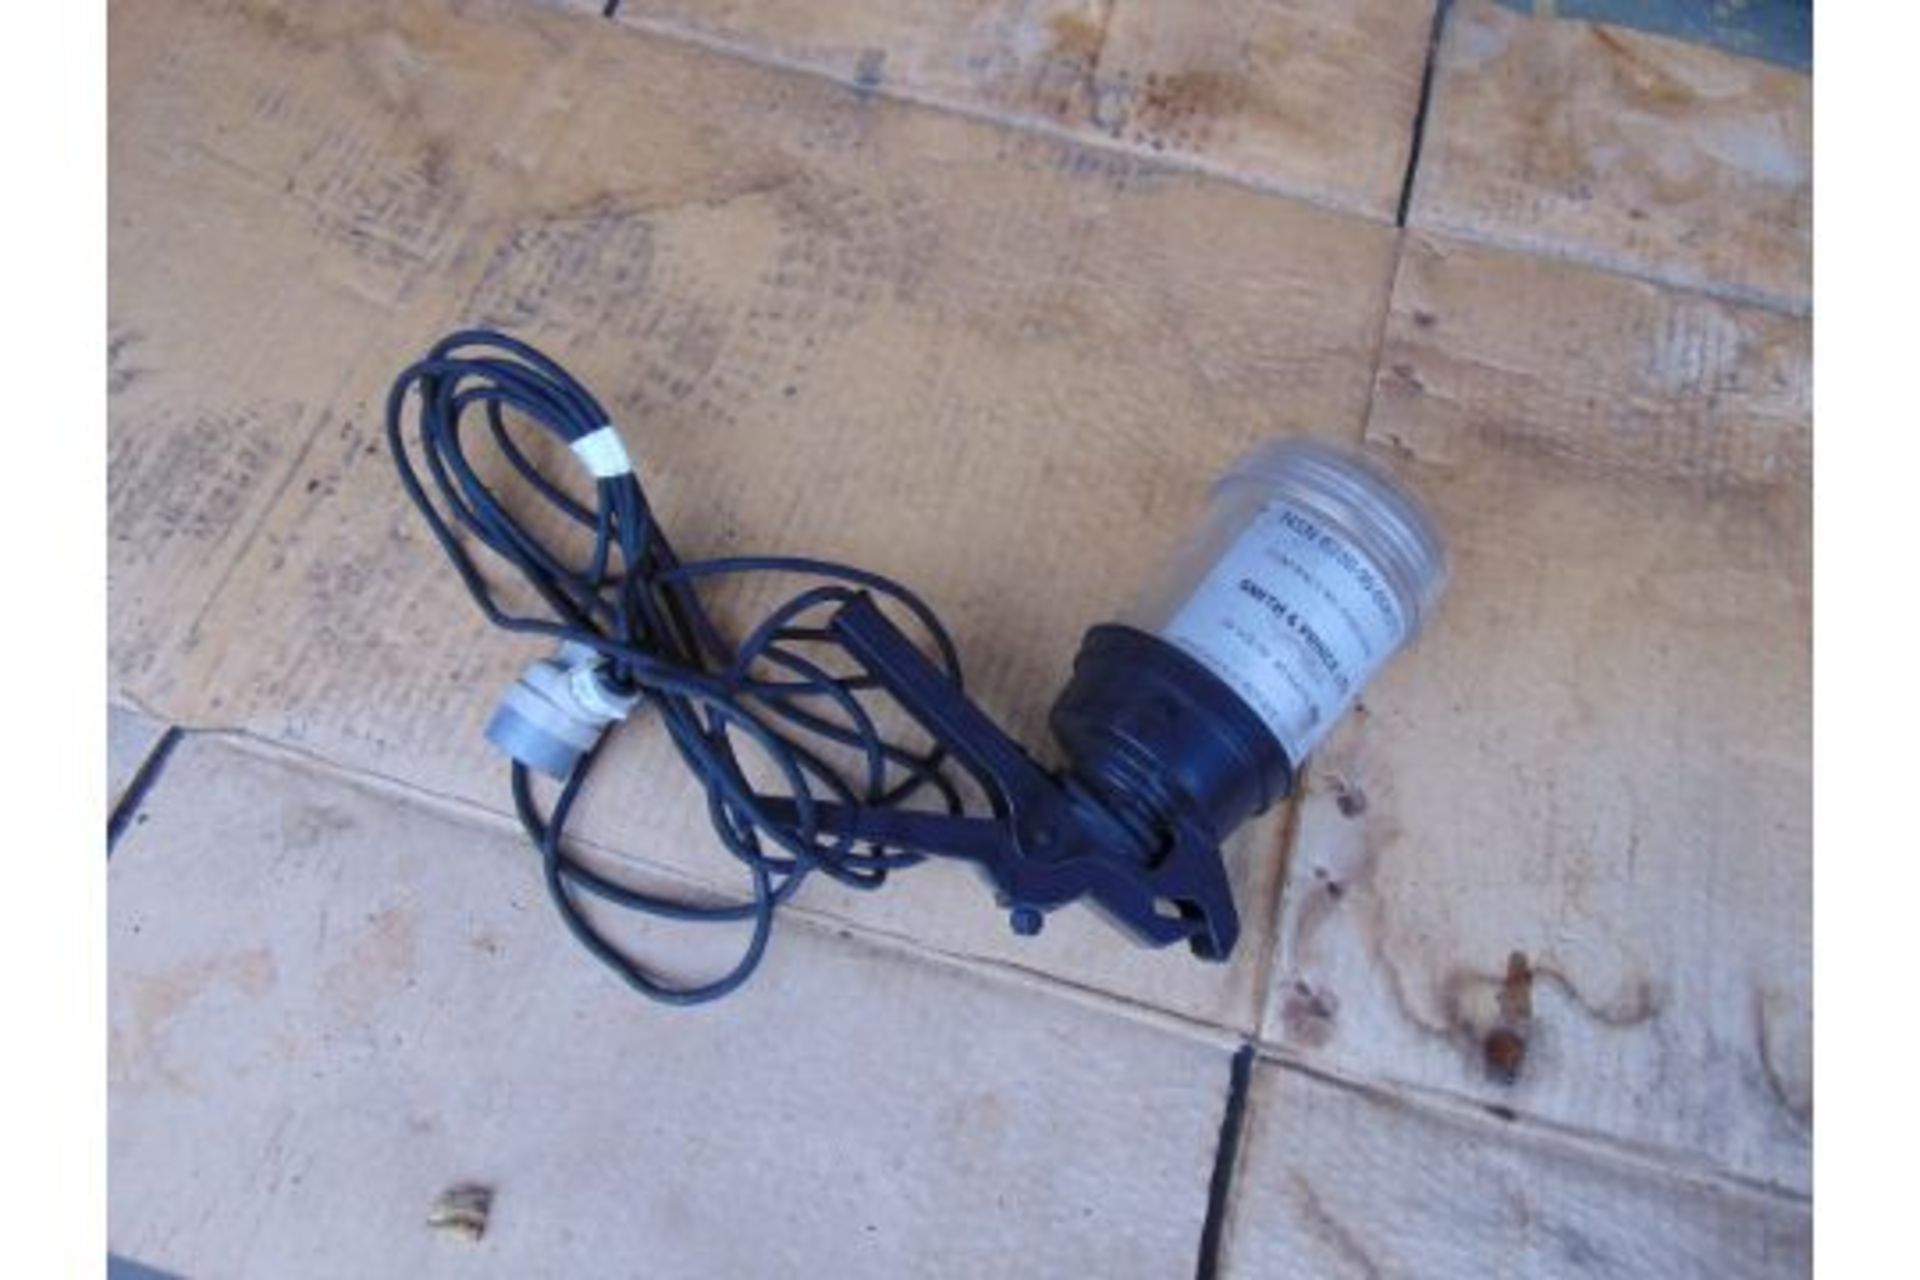 New Unissued Smith and Prince 24v Inspection Lamp - Image 3 of 4